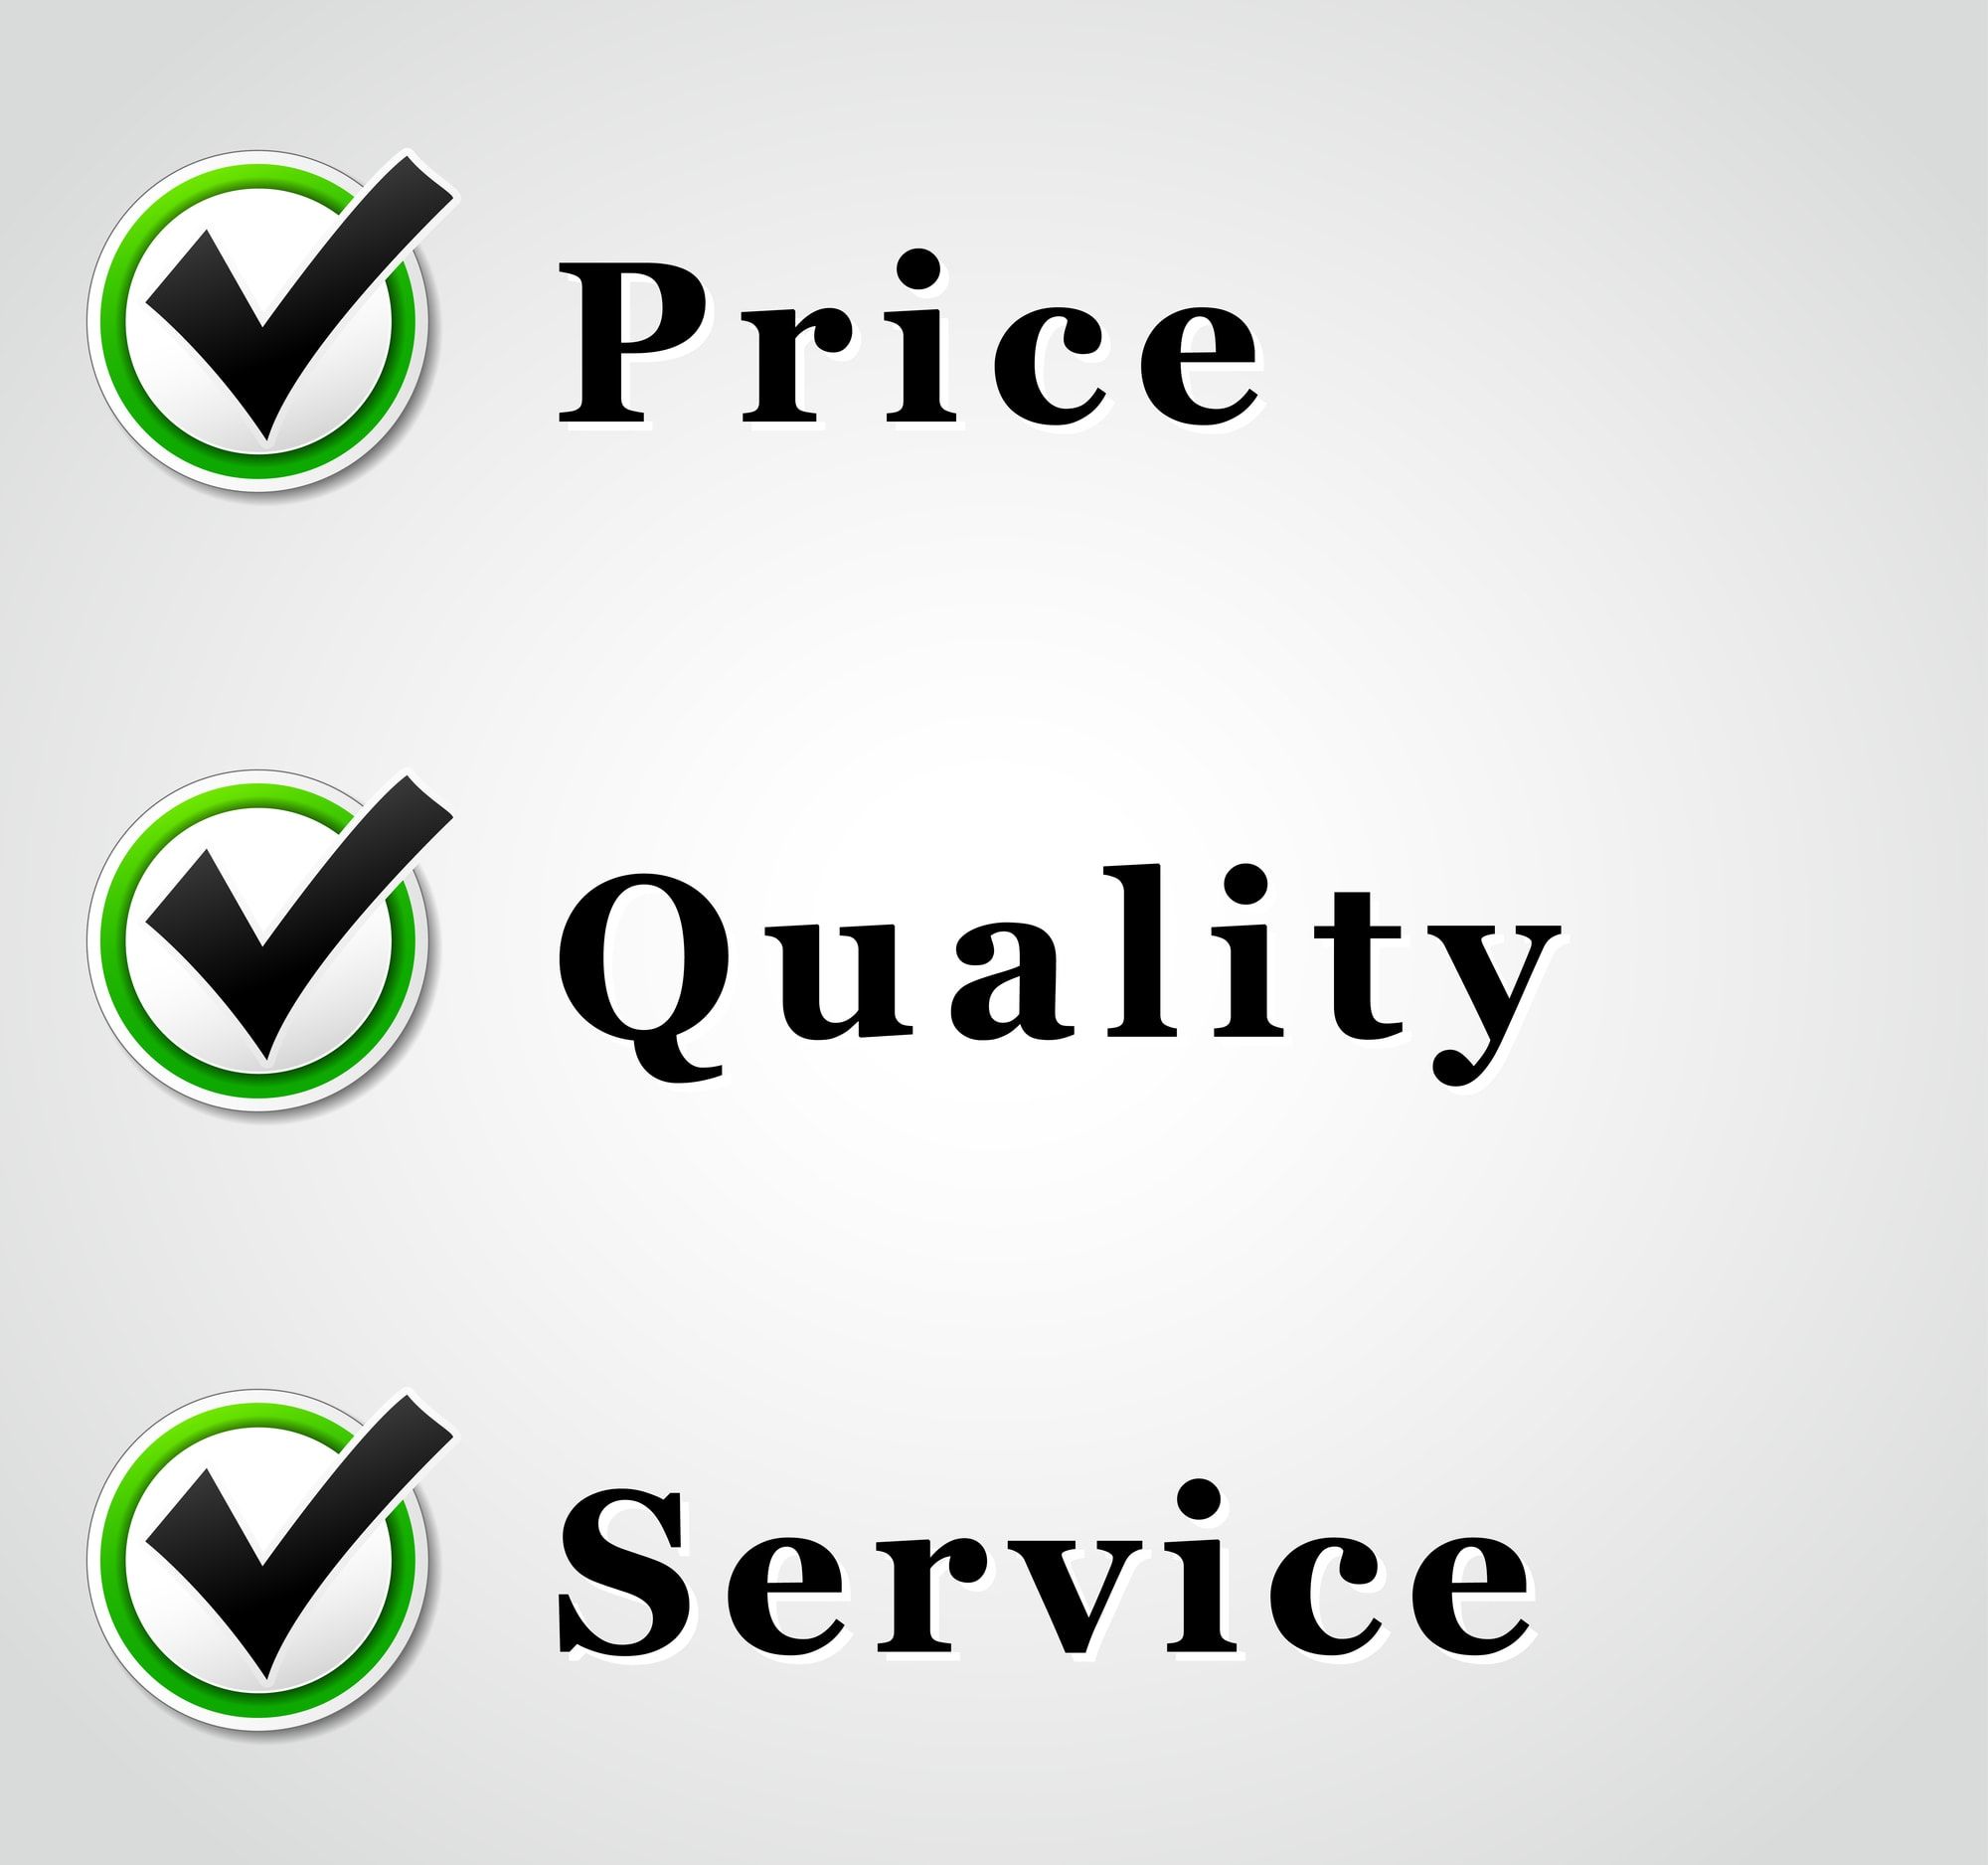 Best price quality and service illustration